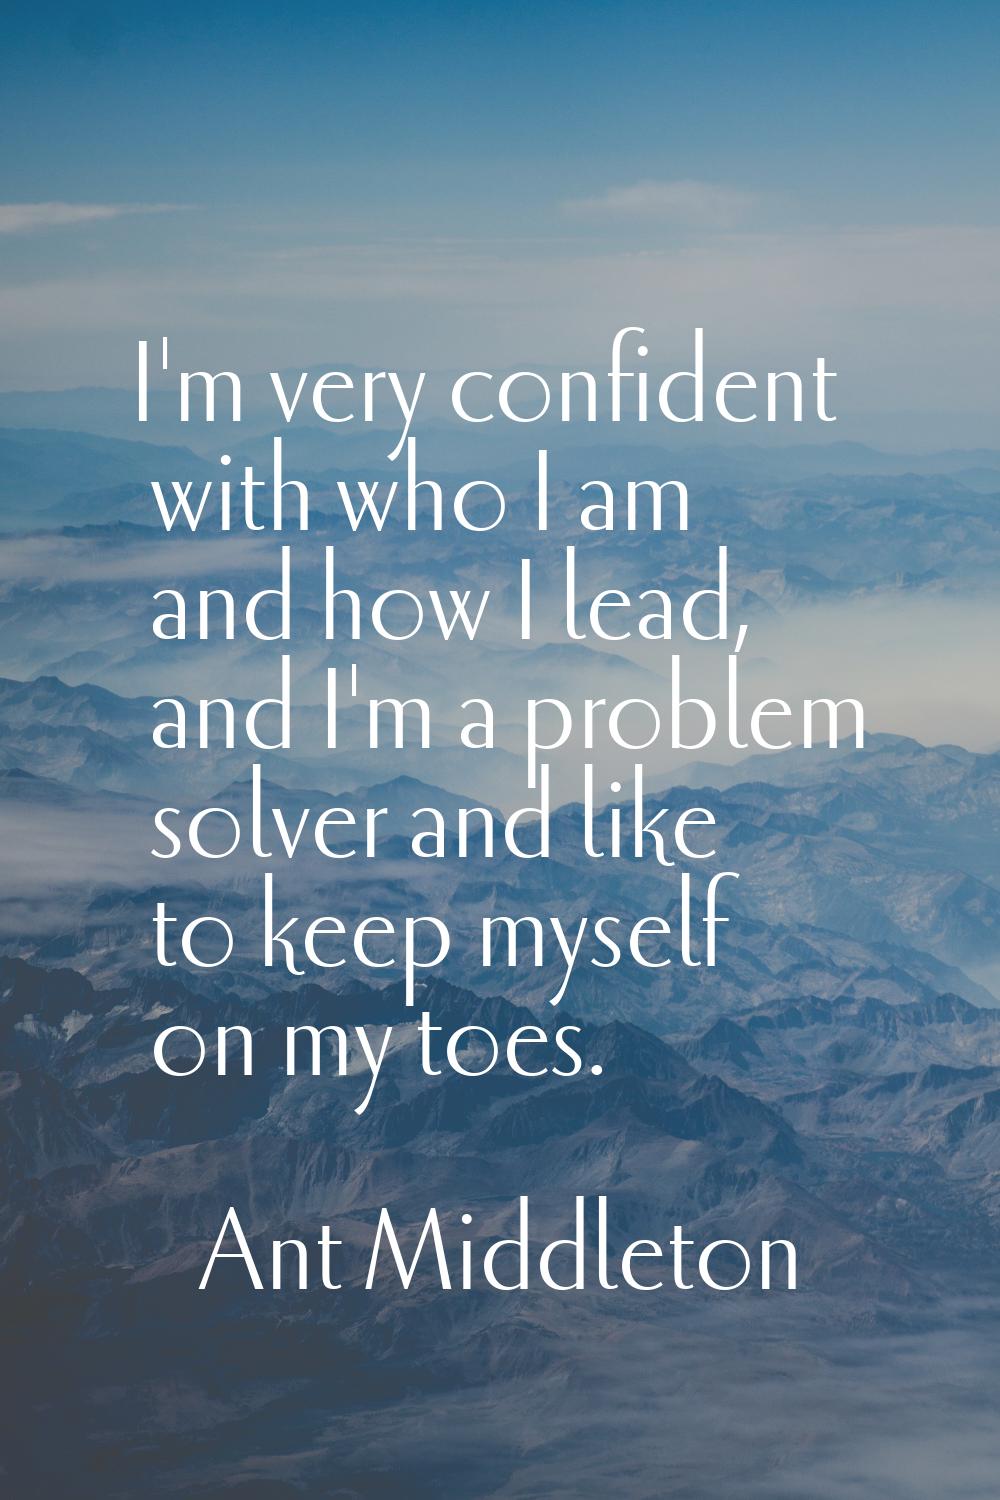 I'm very confident with who I am and how I lead, and I'm a problem solver and like to keep myself o